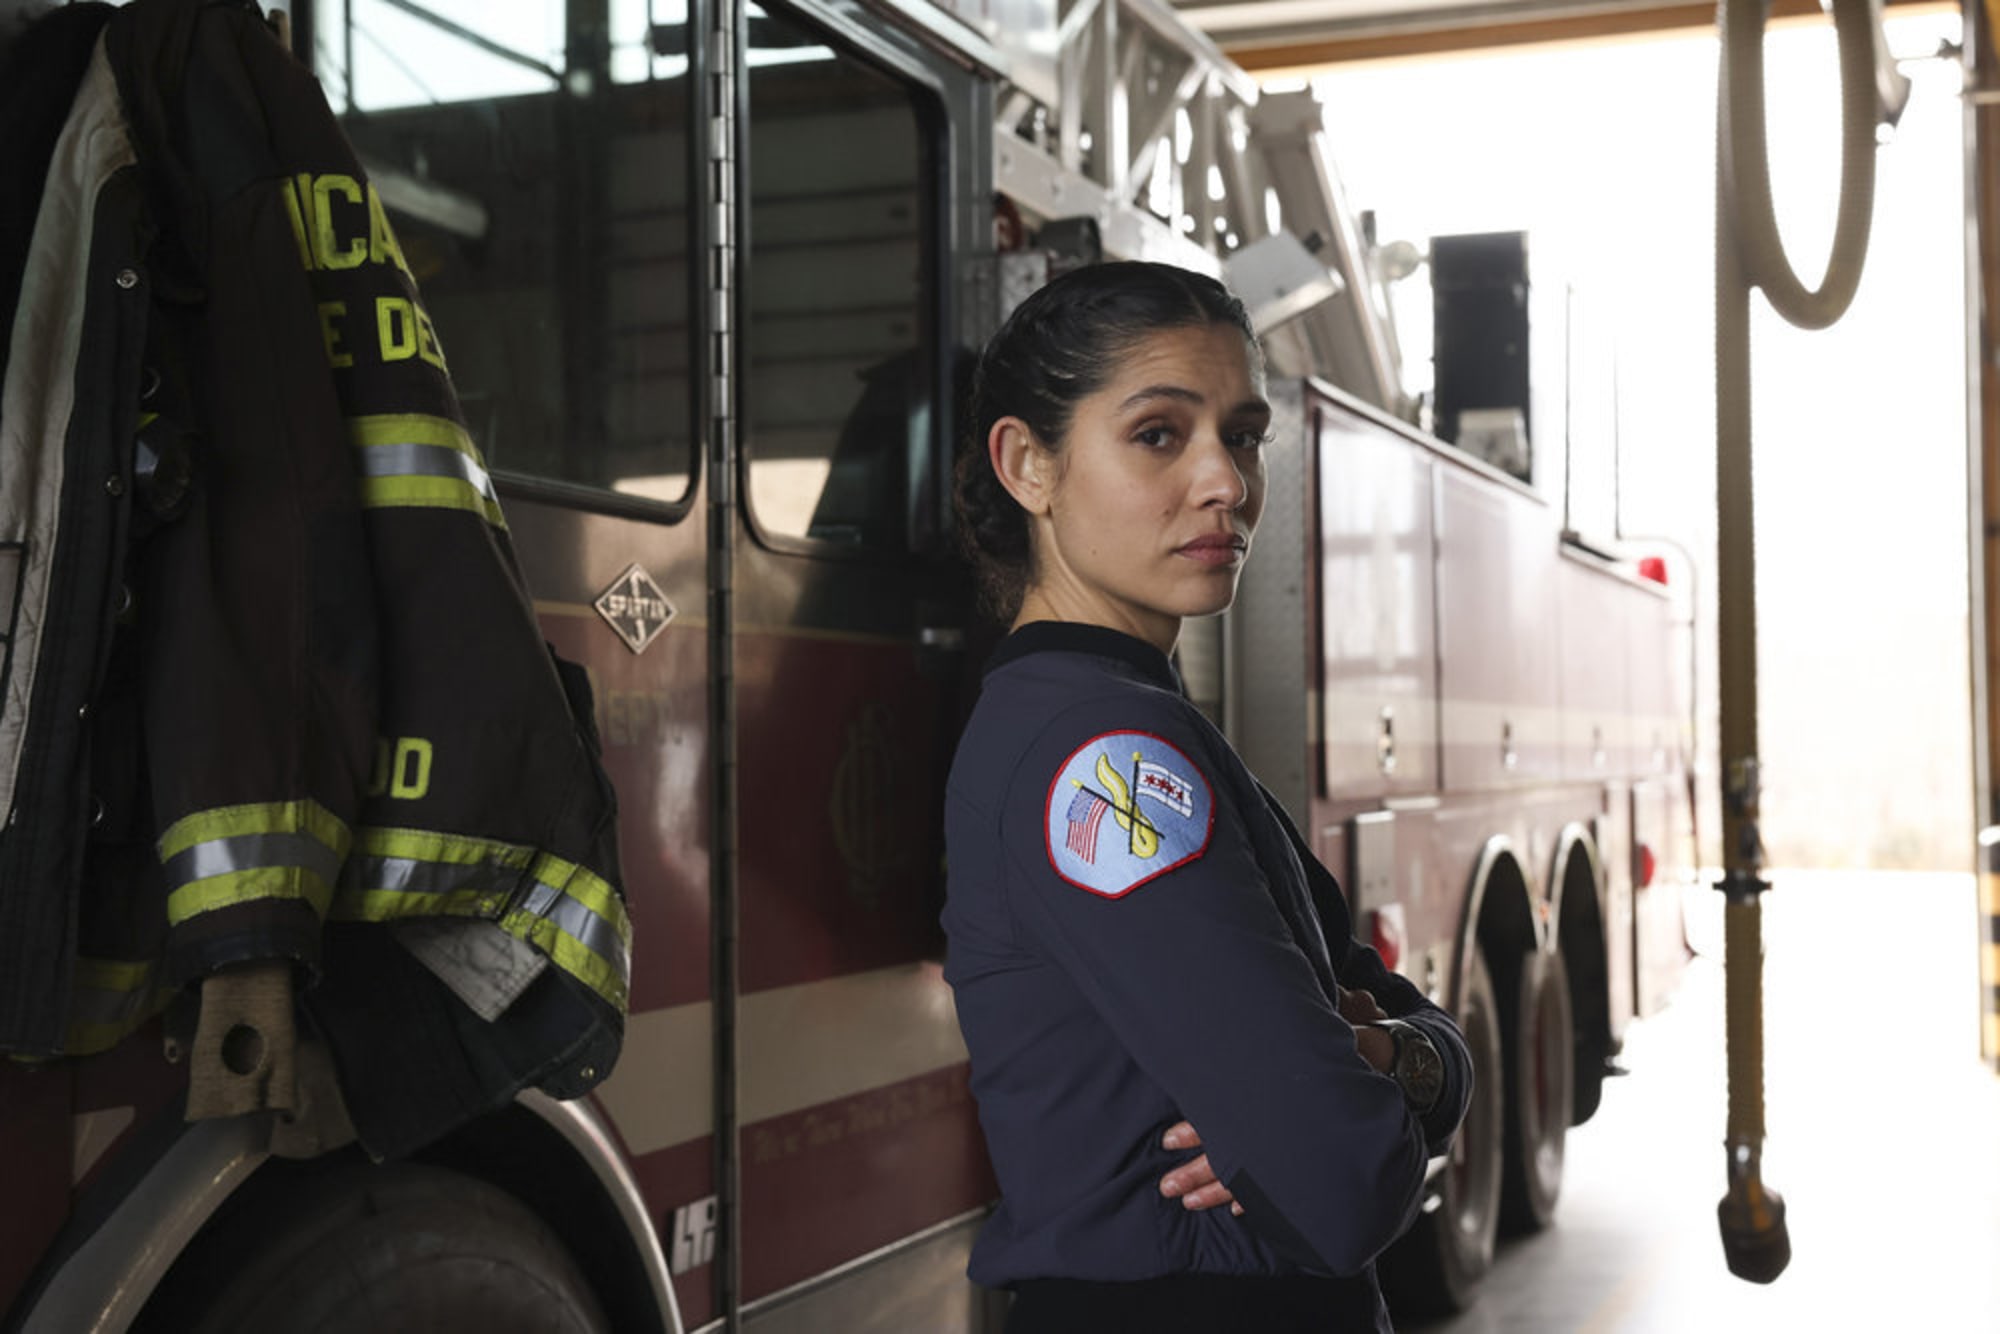 Chicago Fire season 11 is not coming to NBC in August 2022